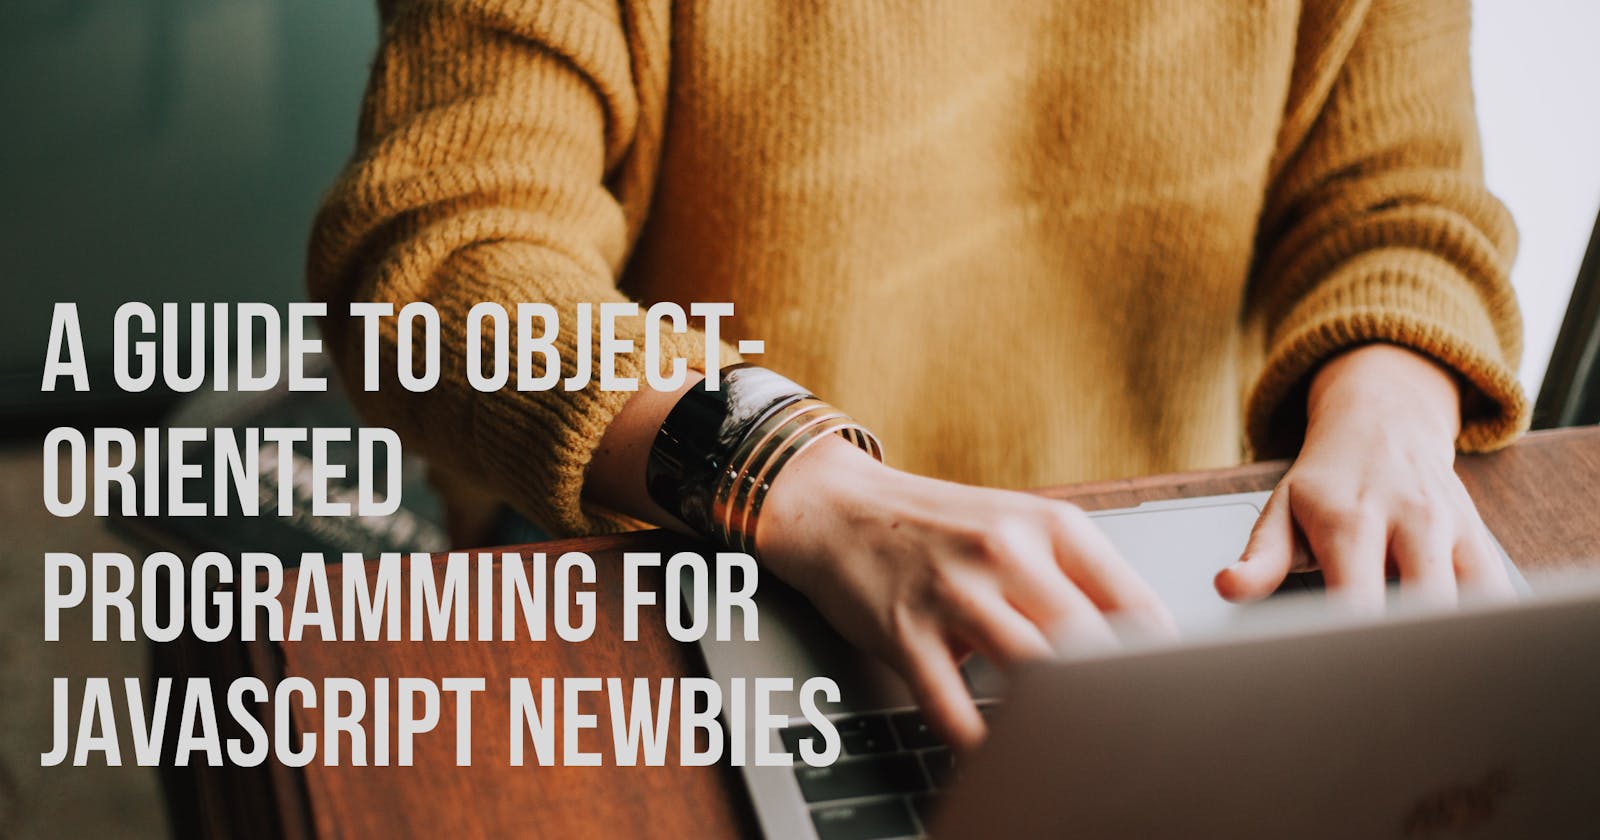 A Guide To Object-oriented Programming For Javascript Newbies